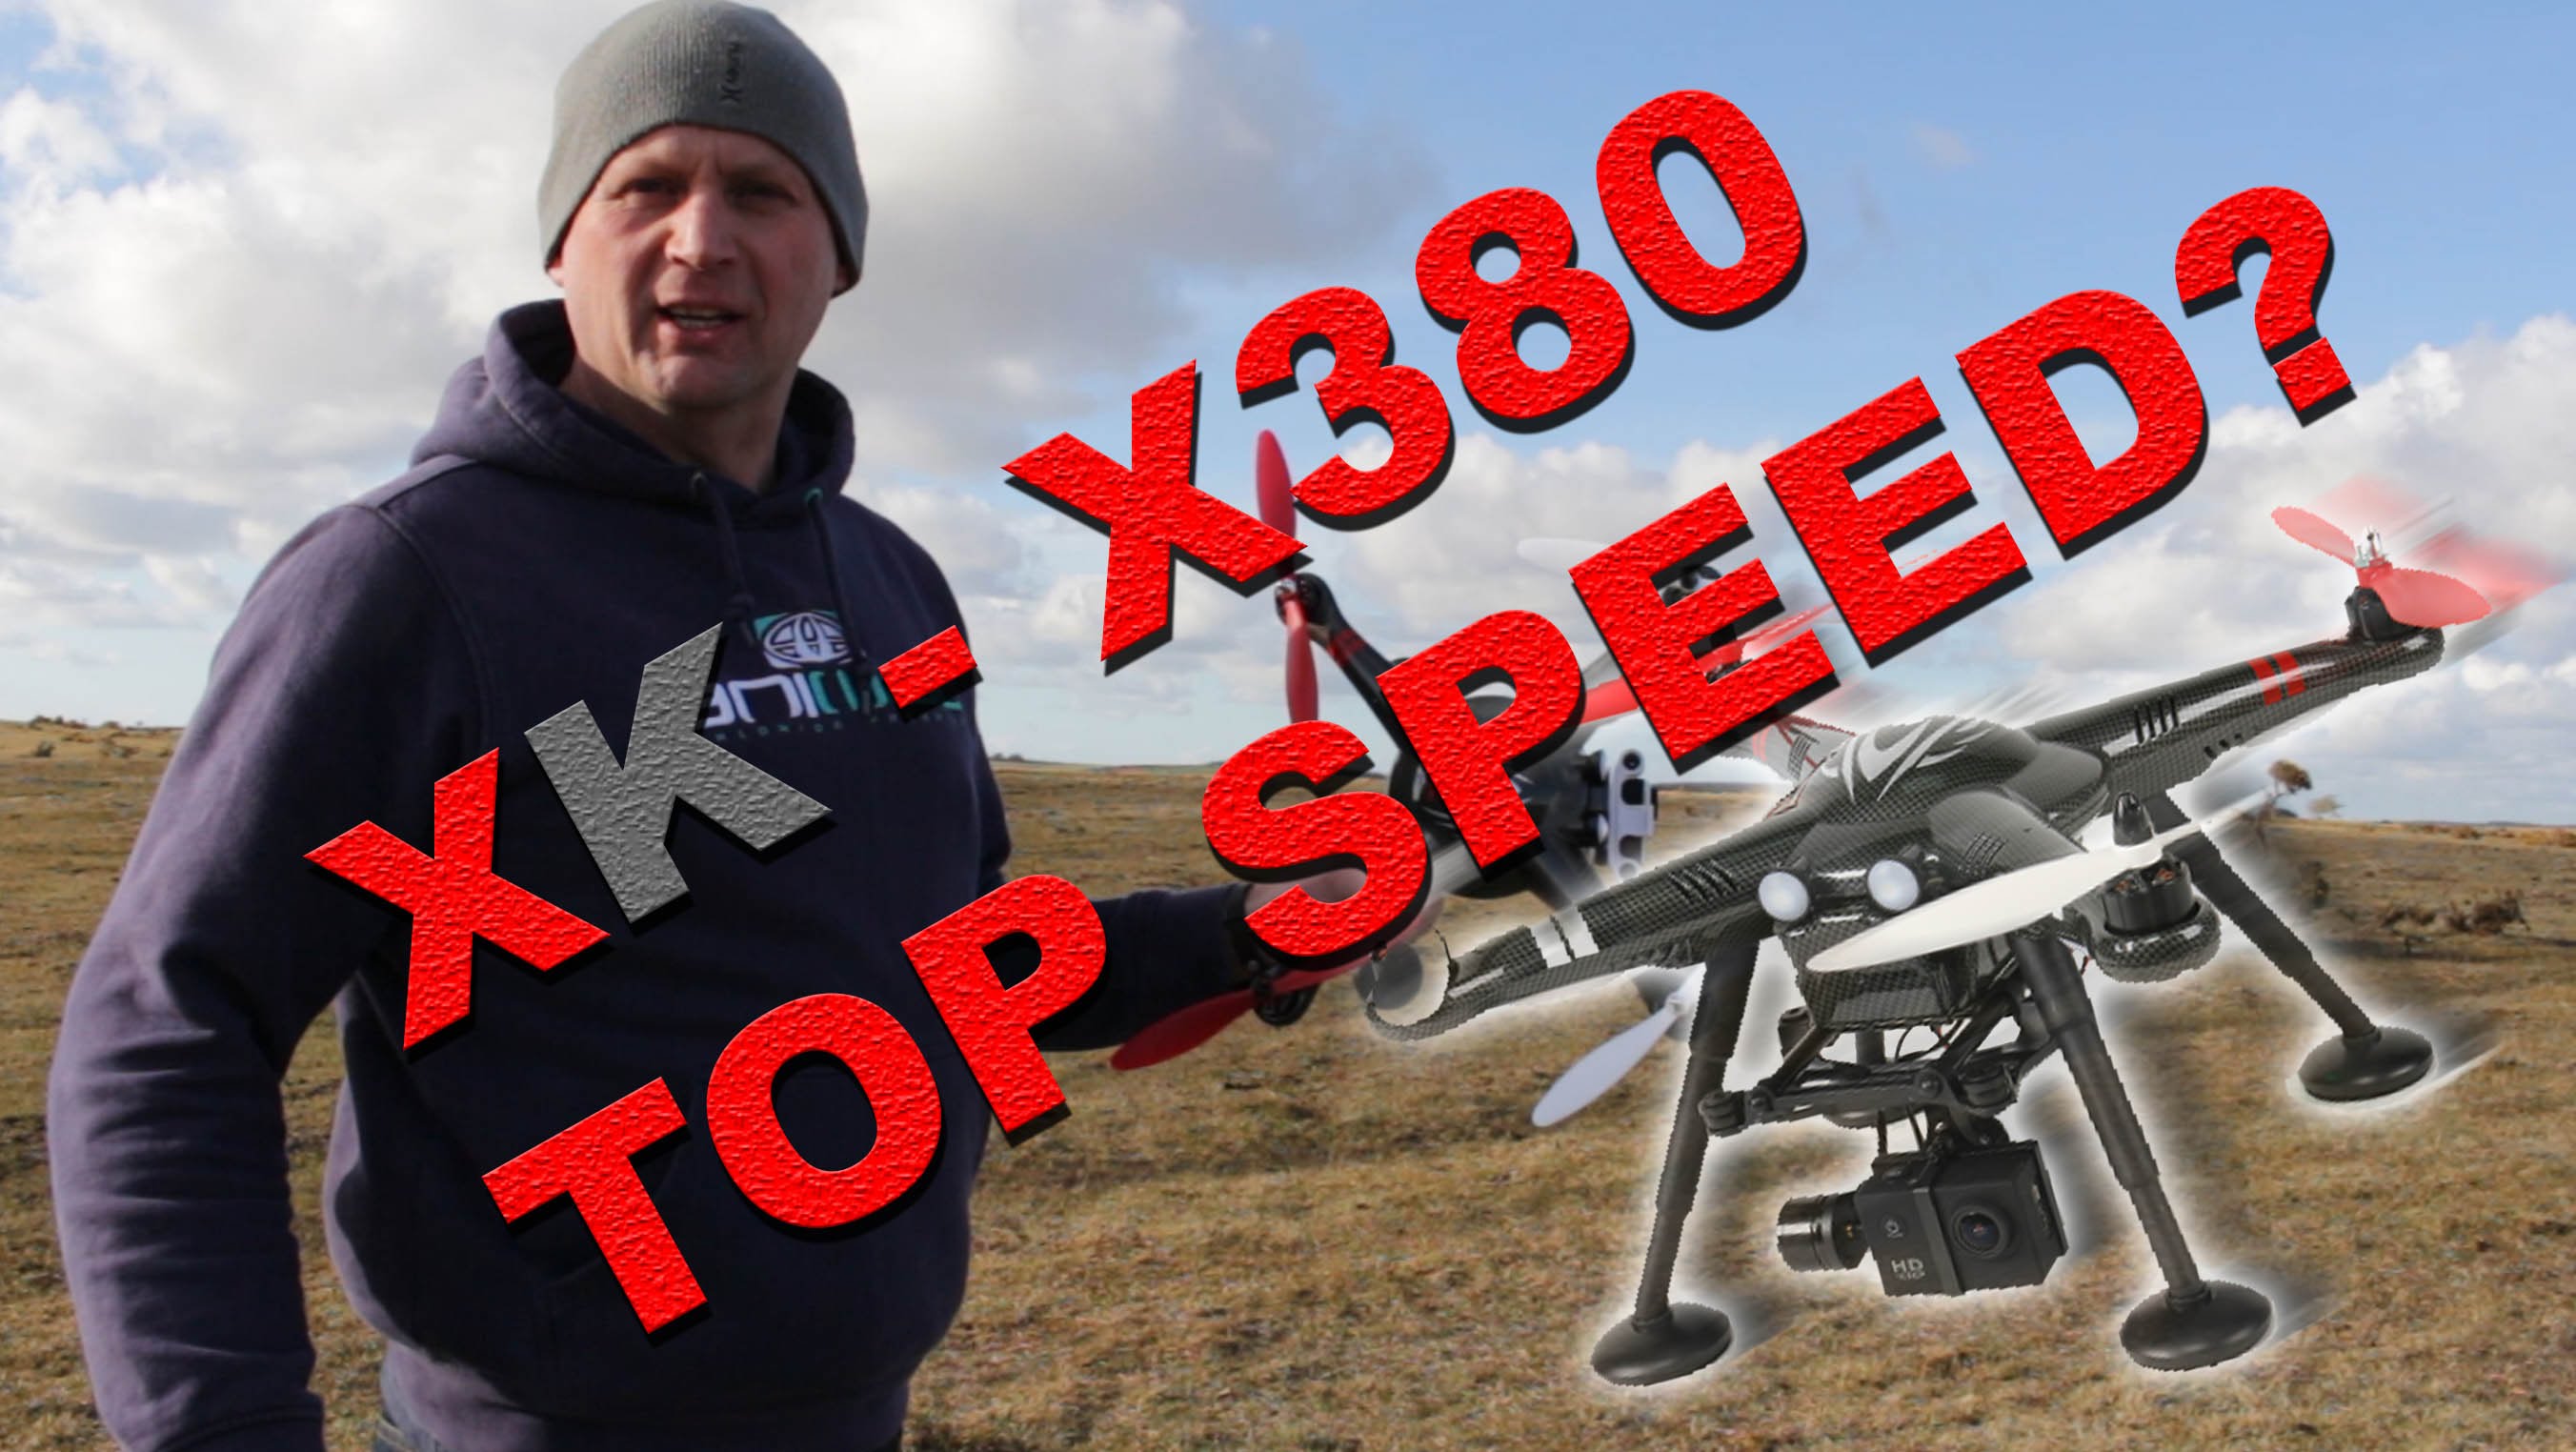 XK Detect X380 Drone – MAX SPEED TEST – FeelWorld FW759 used as FPV Screen